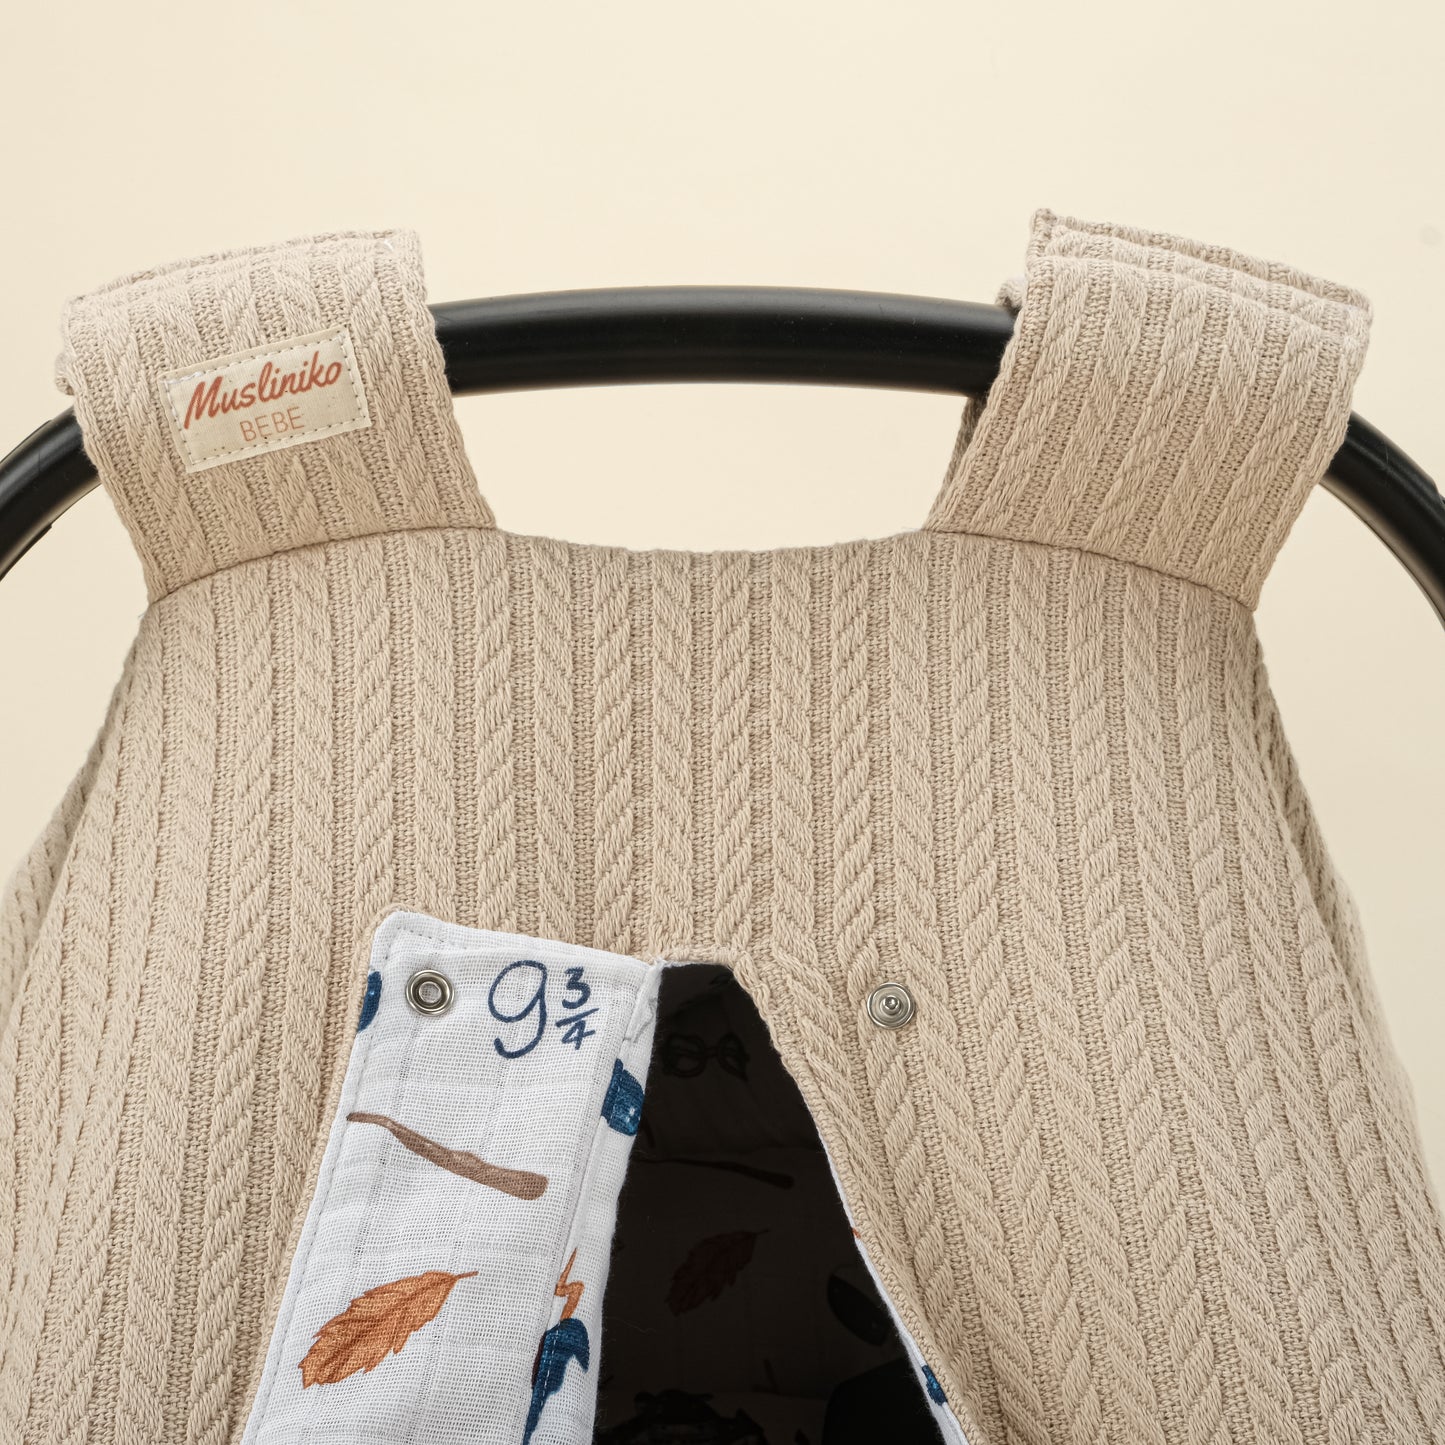 Stroller Cover Set - Double Side - Coffee with Milk Knitting - Harry